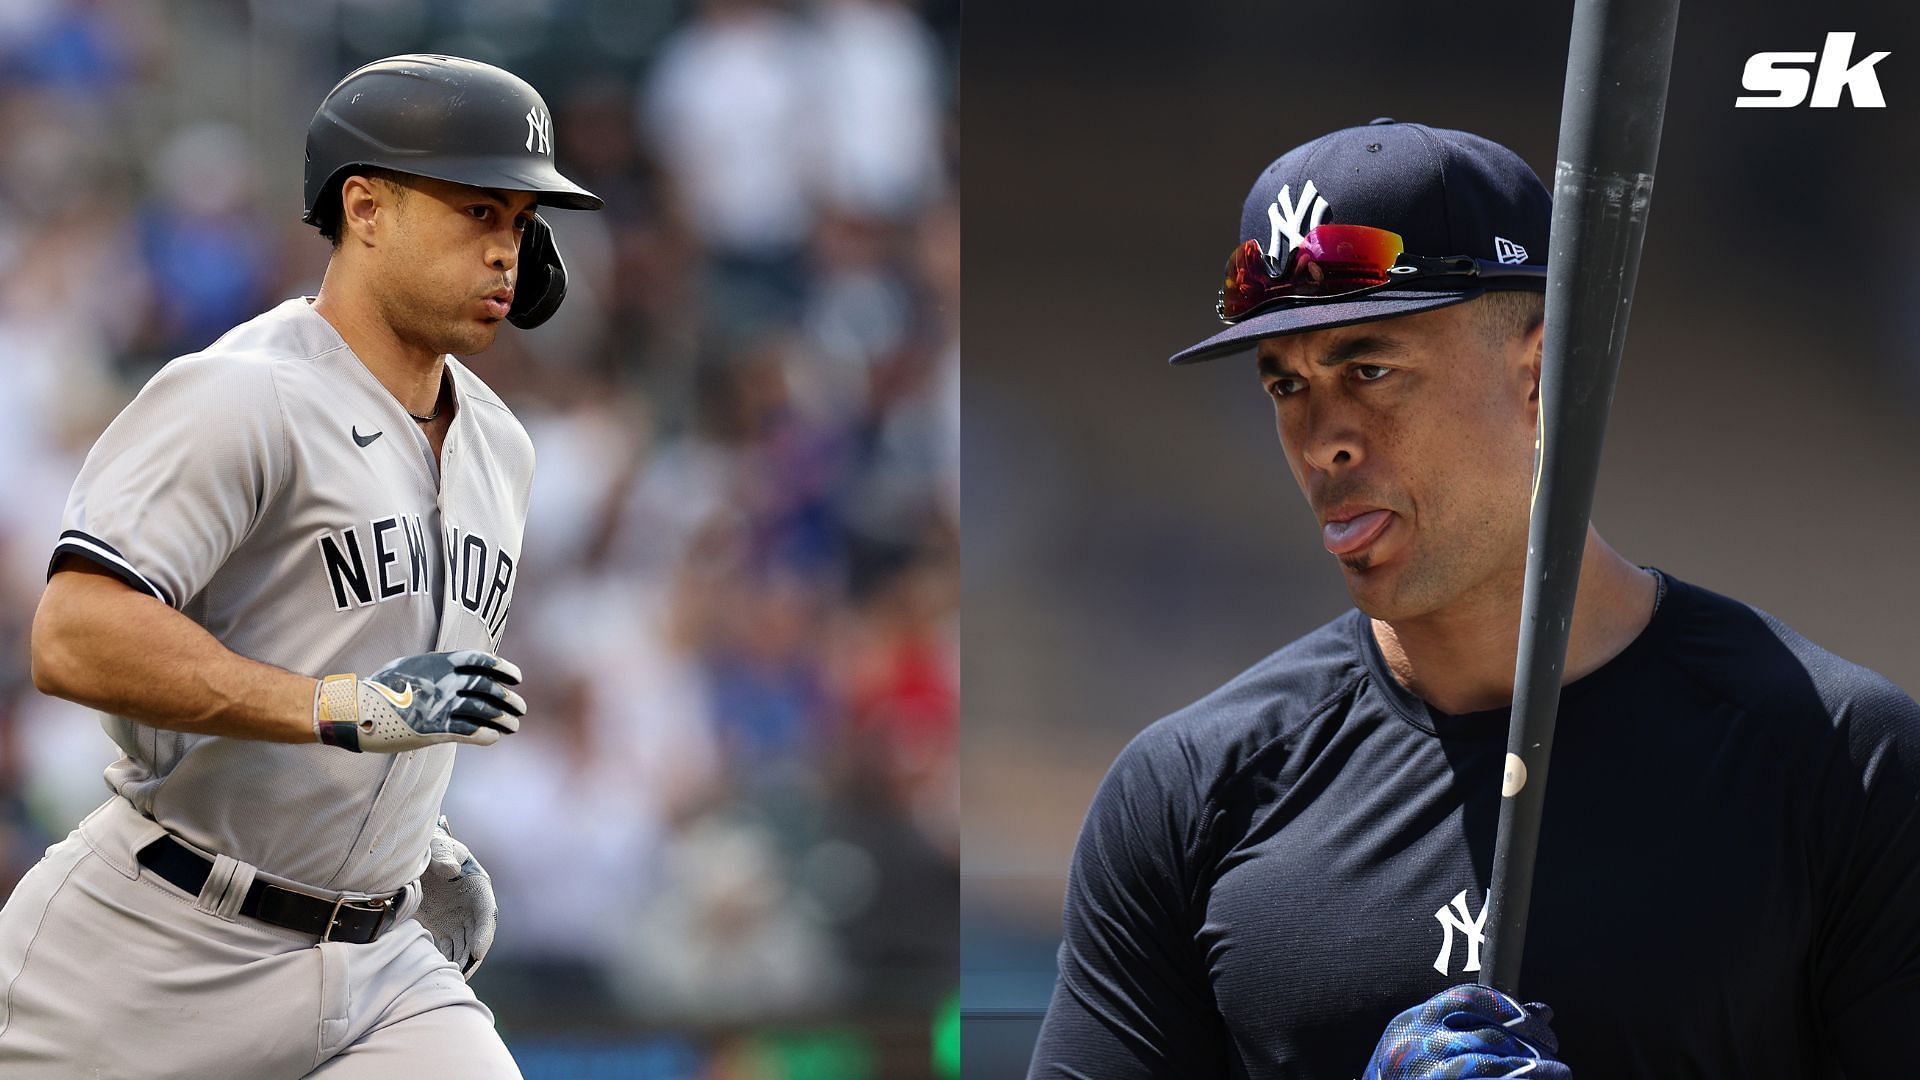 Giancarlo Stanton puts the rest of MLB on notice with thunderous